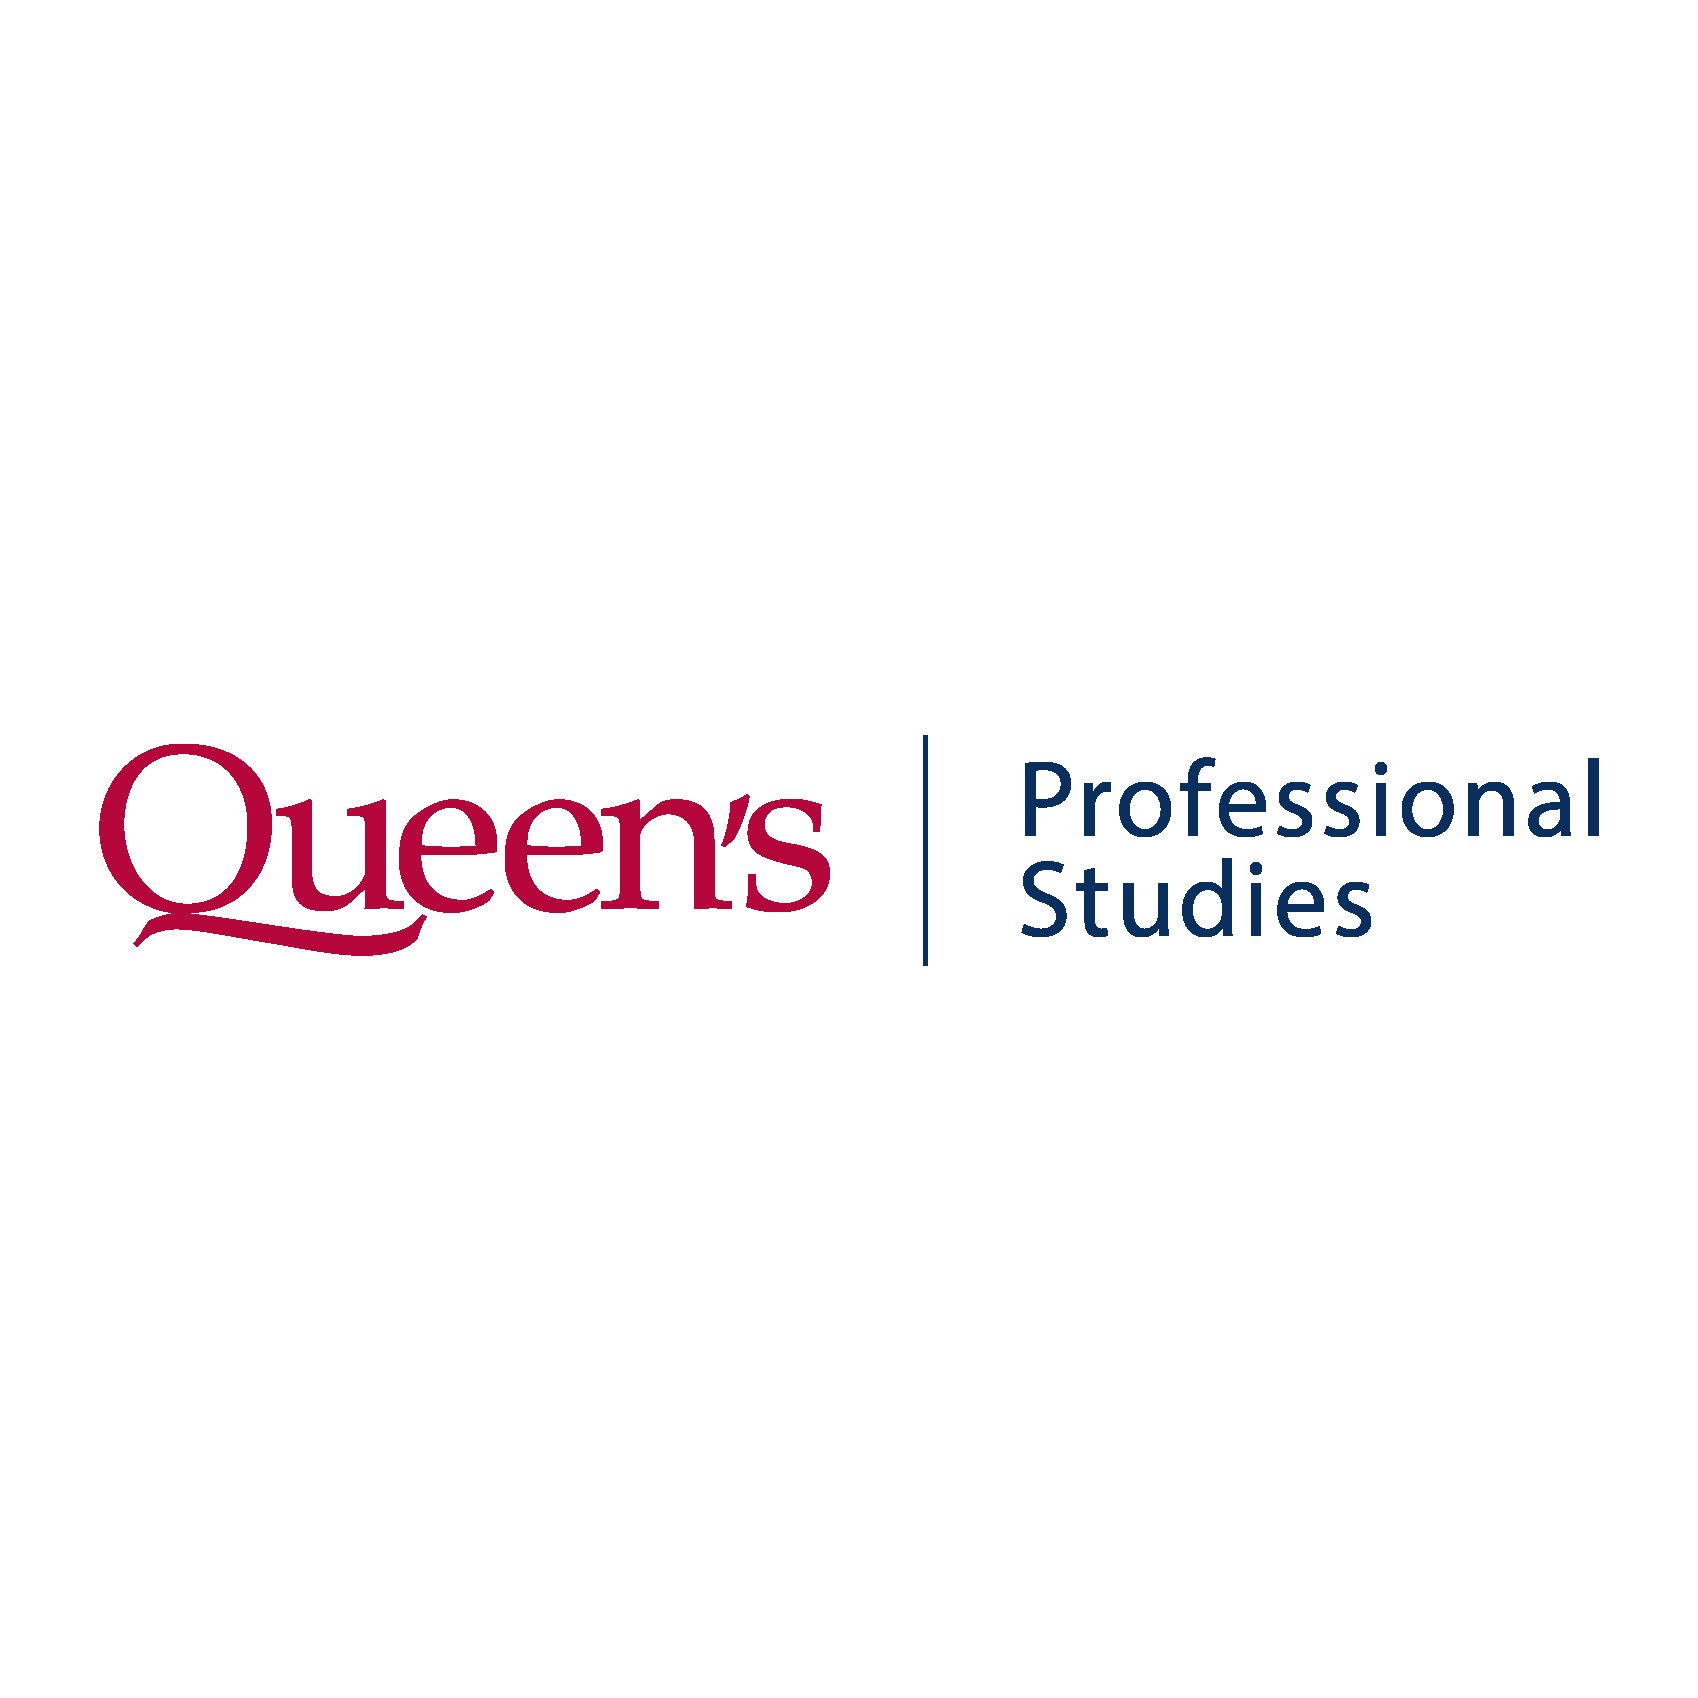 Empowering professionals through innovative and affordable courses | Queen's University